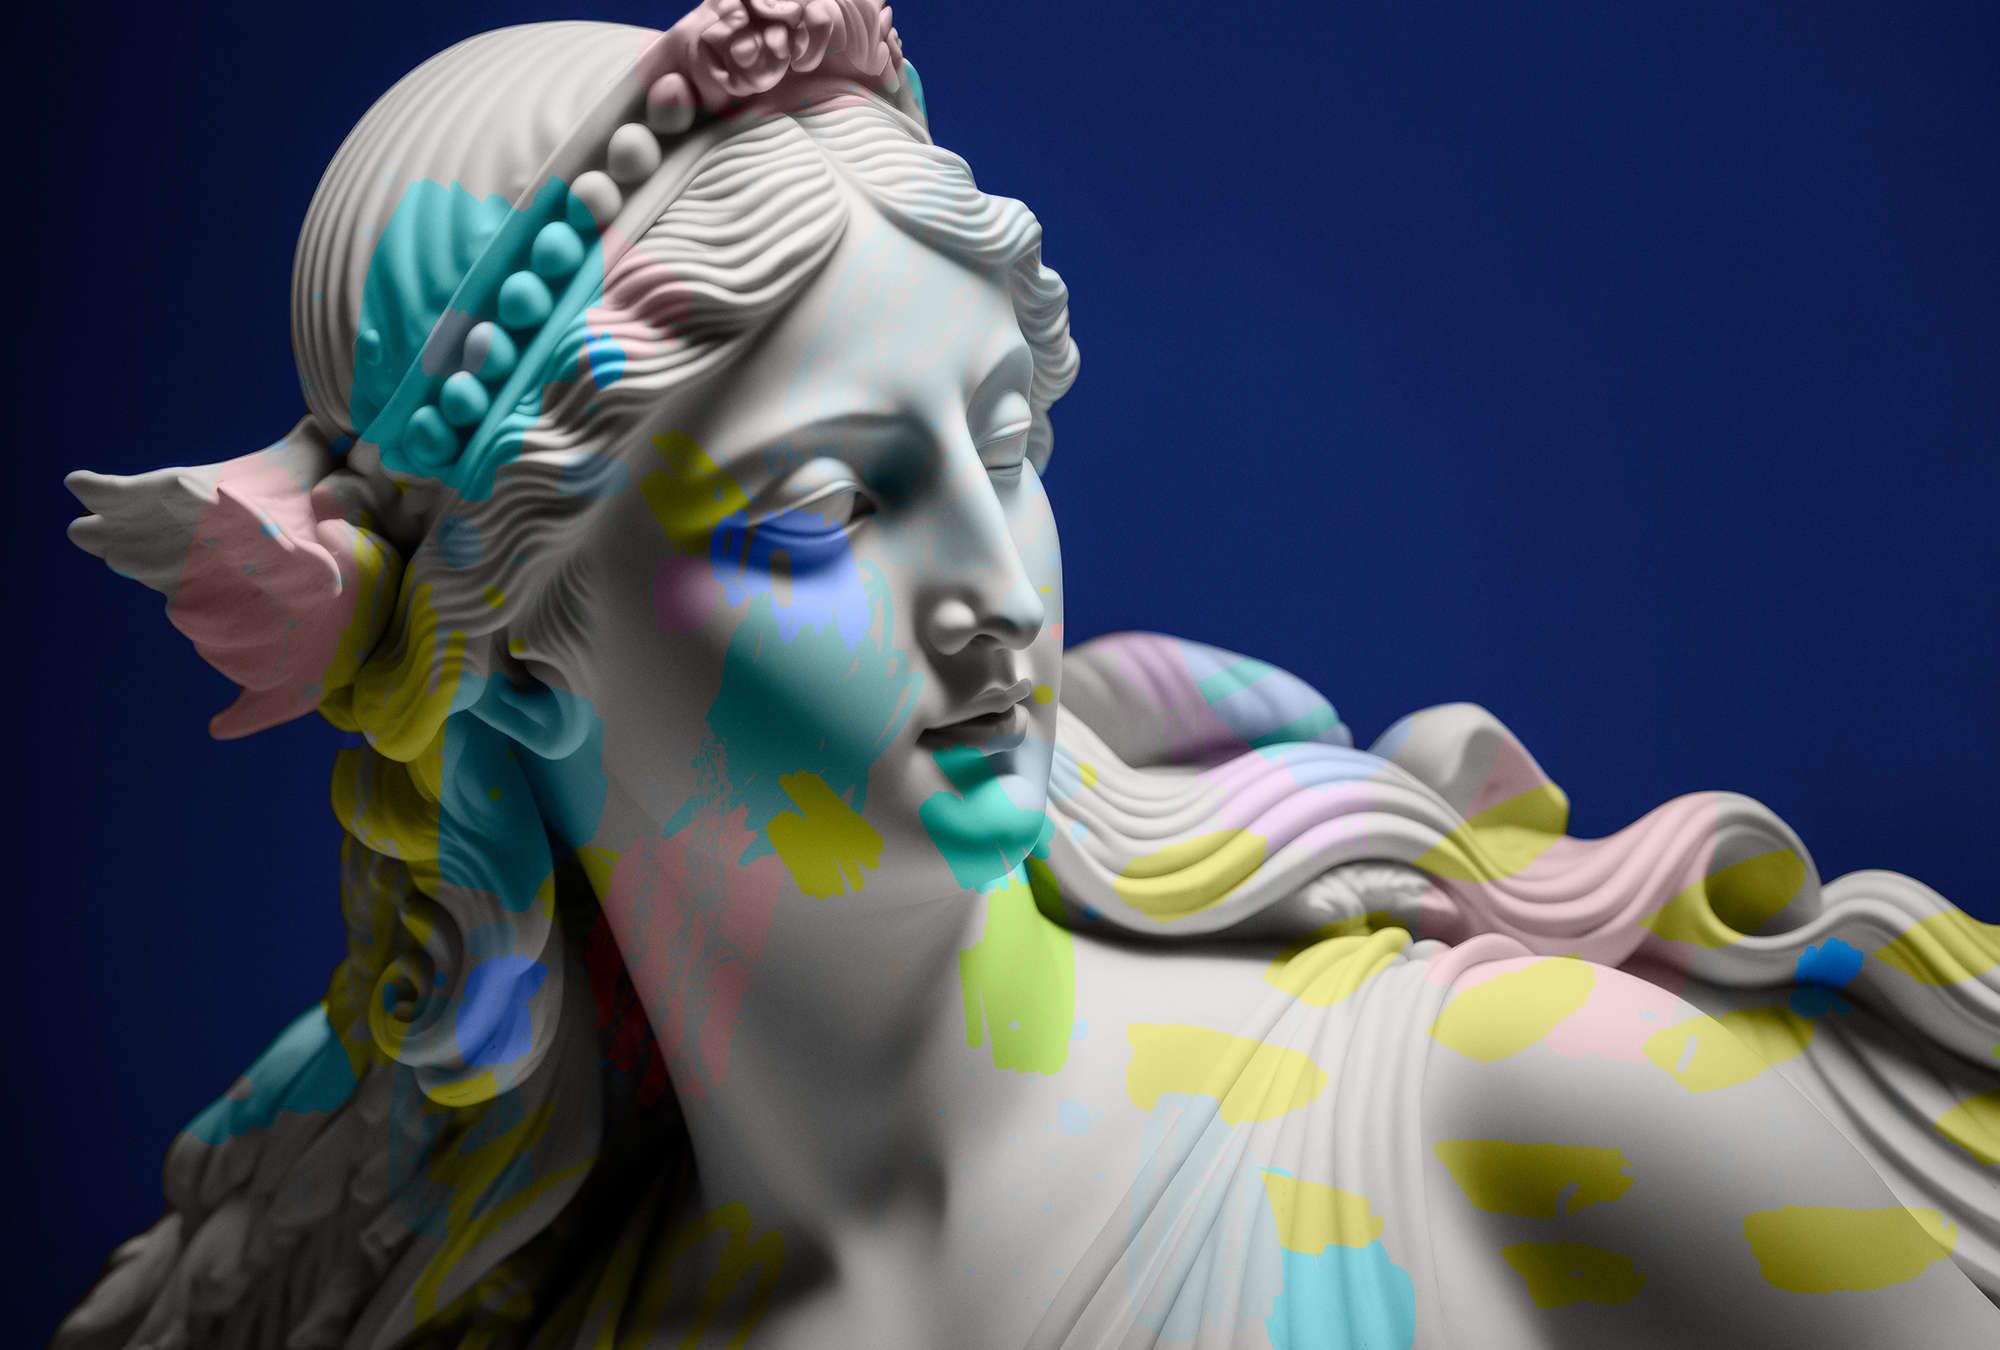             Photo wallpaper »anthea« - female sculpture with colourful accents - Smooth, slightly pearly shimmering non-woven fabric
        